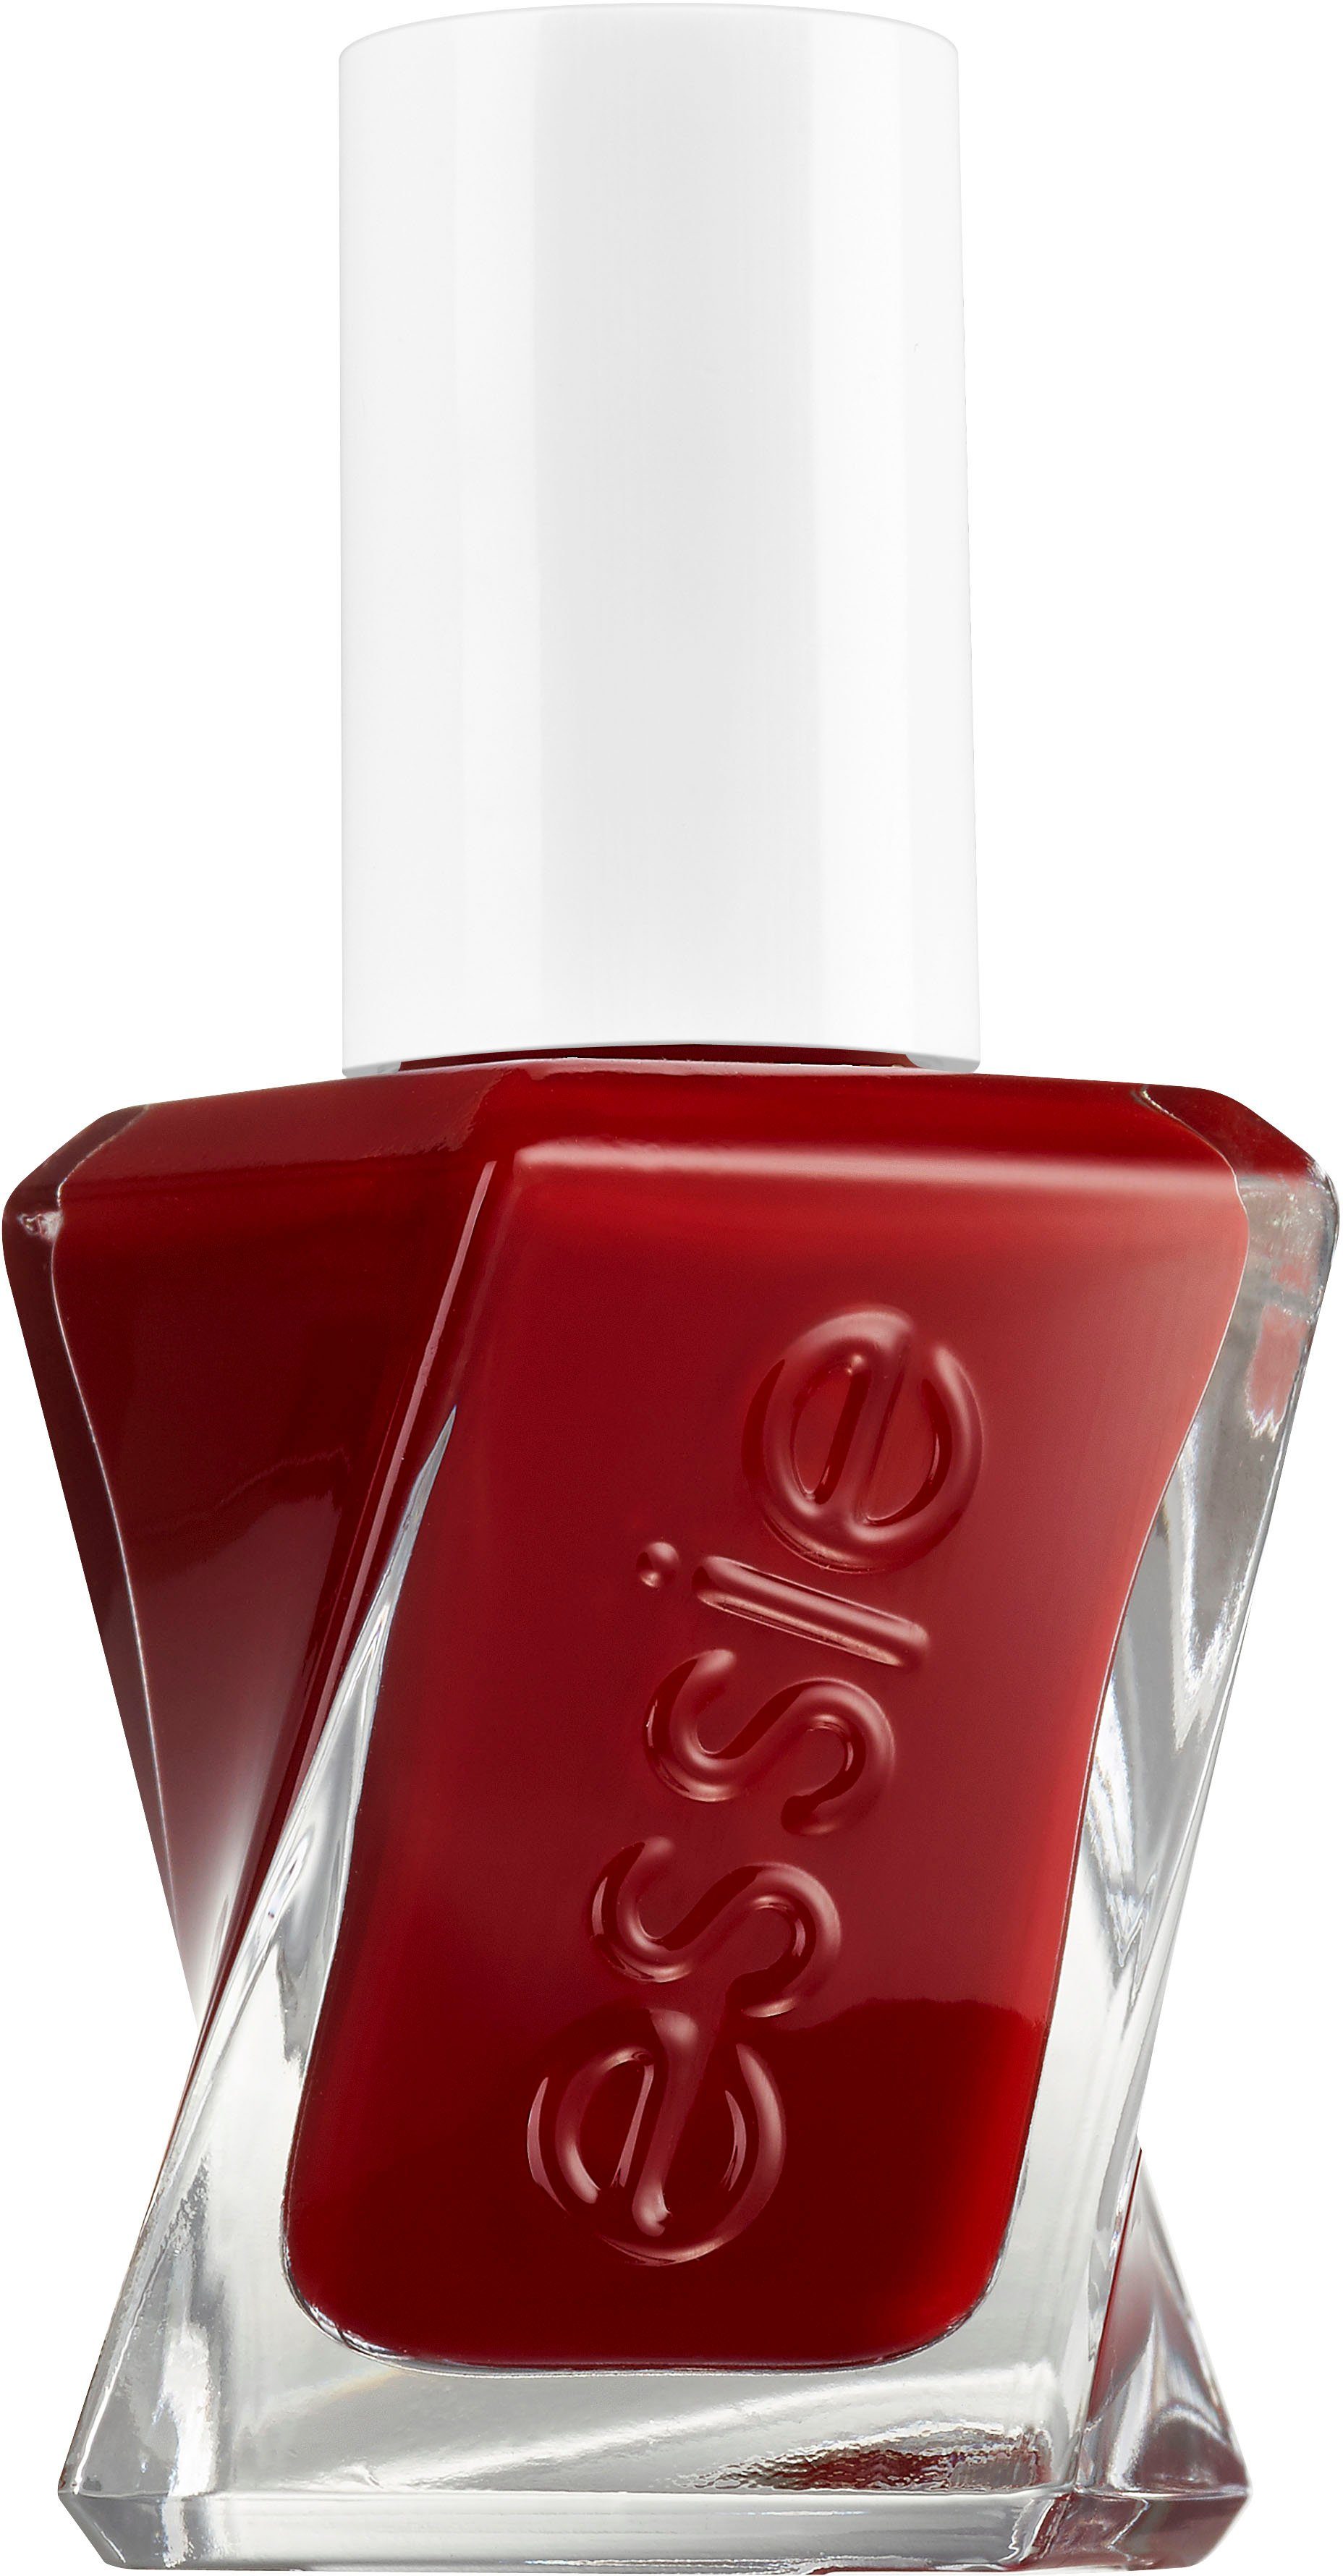 Gel-Nagellack bubbles Gel essie Nr. 345 Couture Rot only